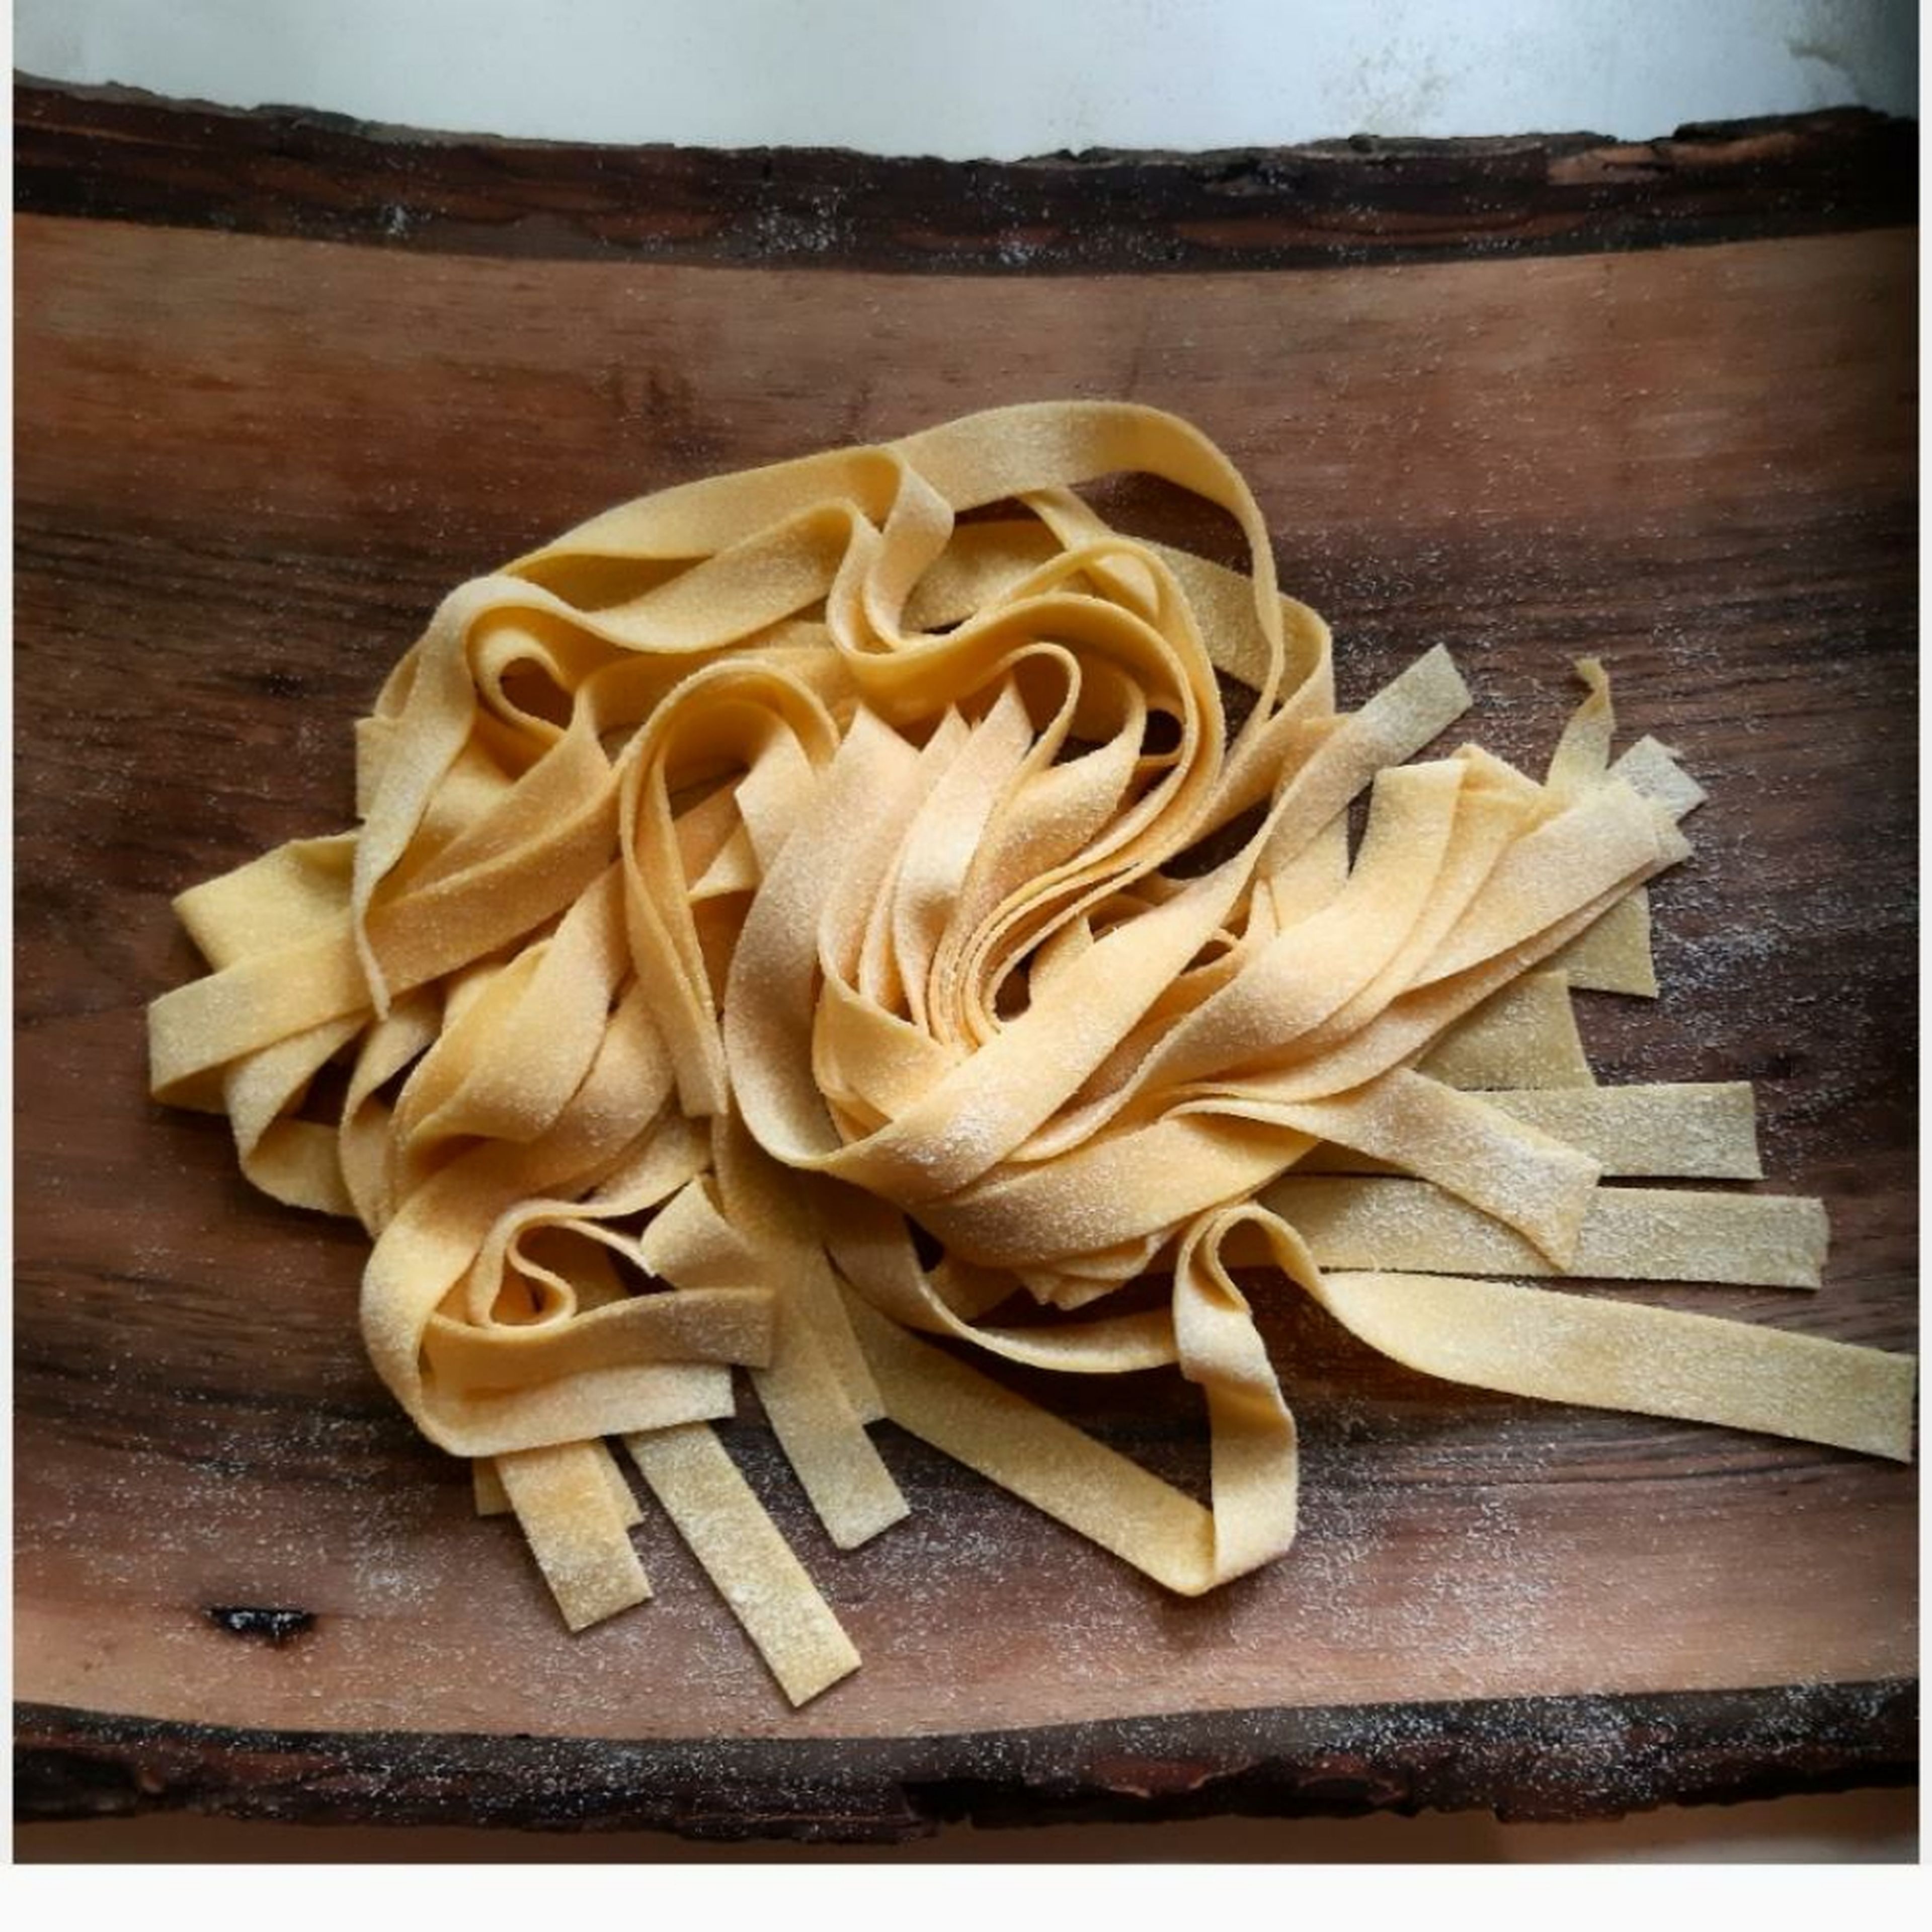 It's very important to leave you pasta to dry a bit before to cook it. It will avoid that gluey feeling. You can use the back of a chair or just your table but make sure to use enough flour.